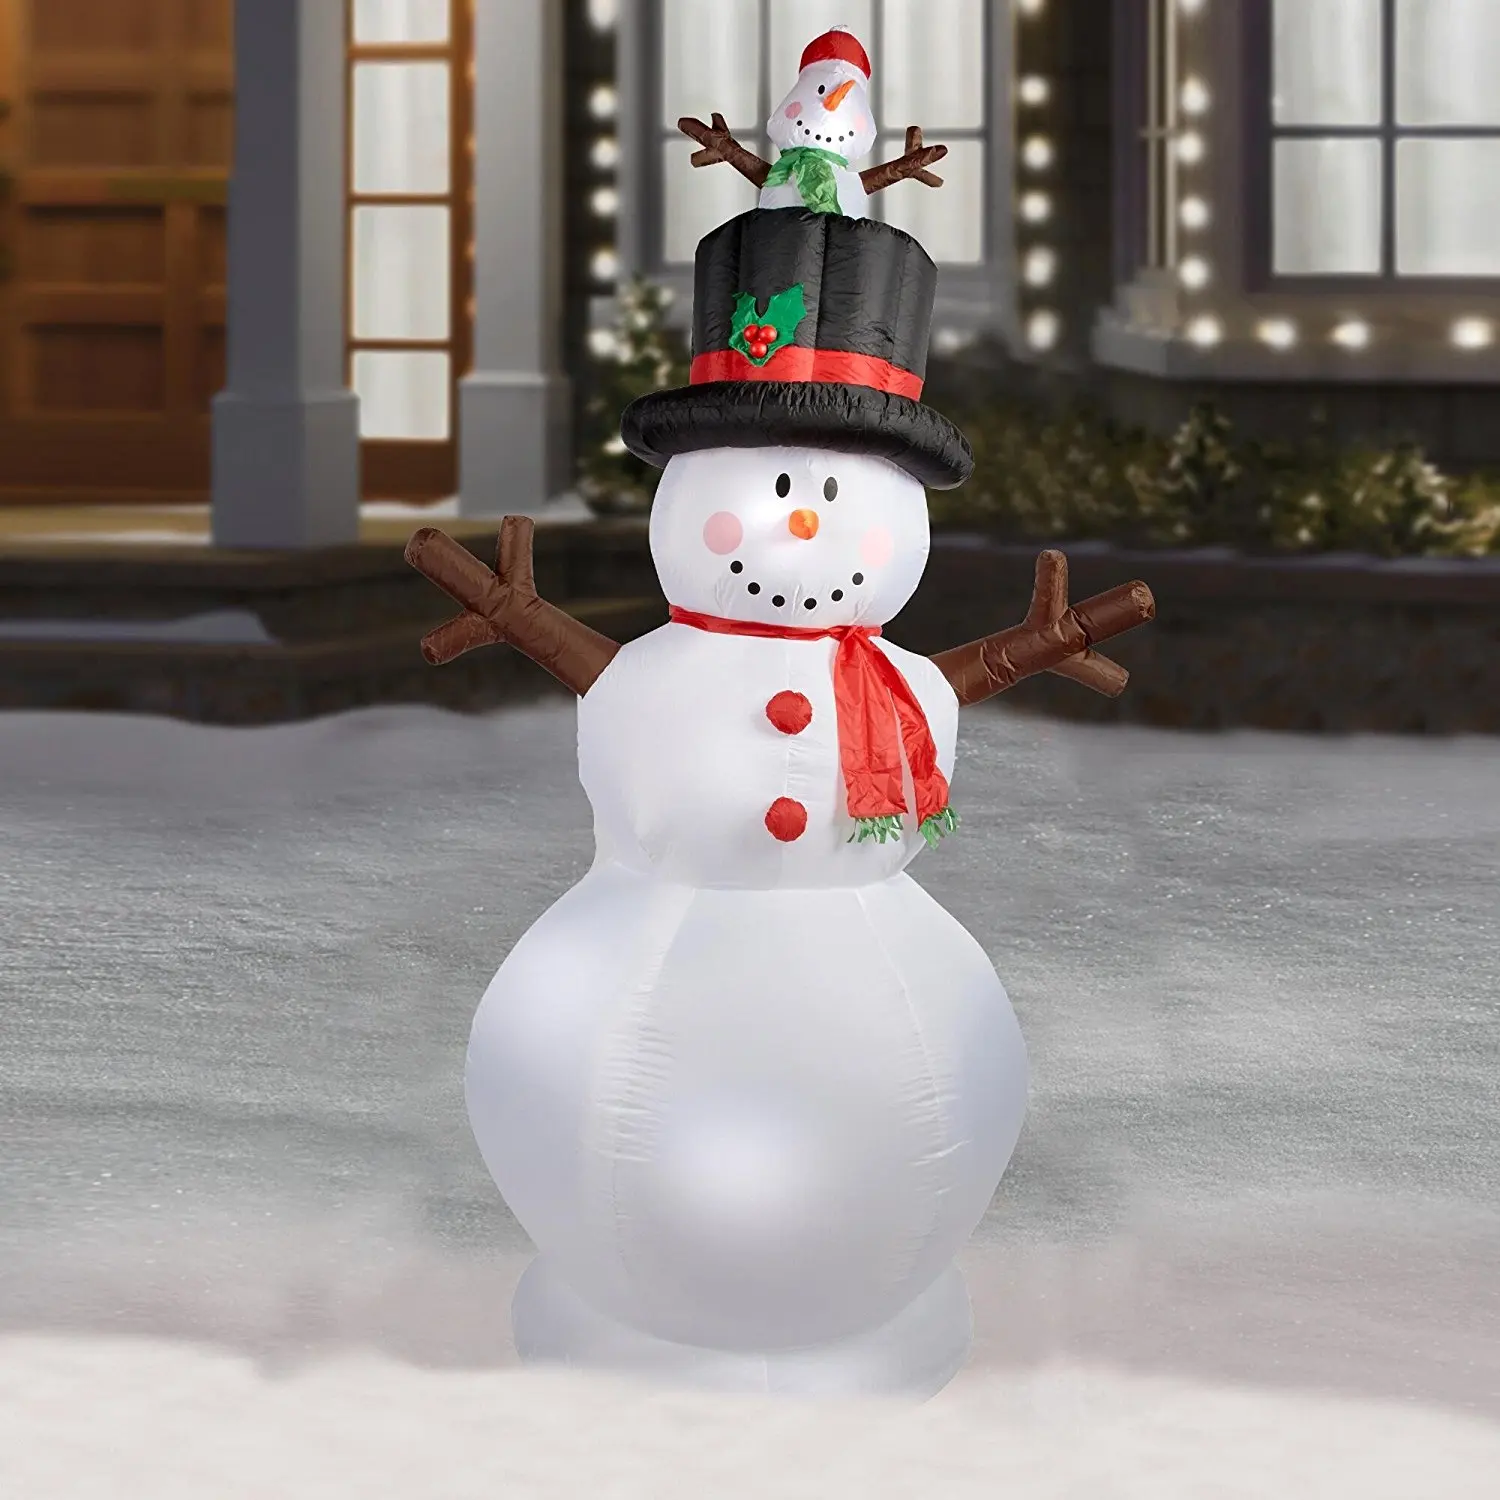 HUGE 9.5 Feet Gemmy Colossal inflatable lighted snowman with pop-up baby sn...